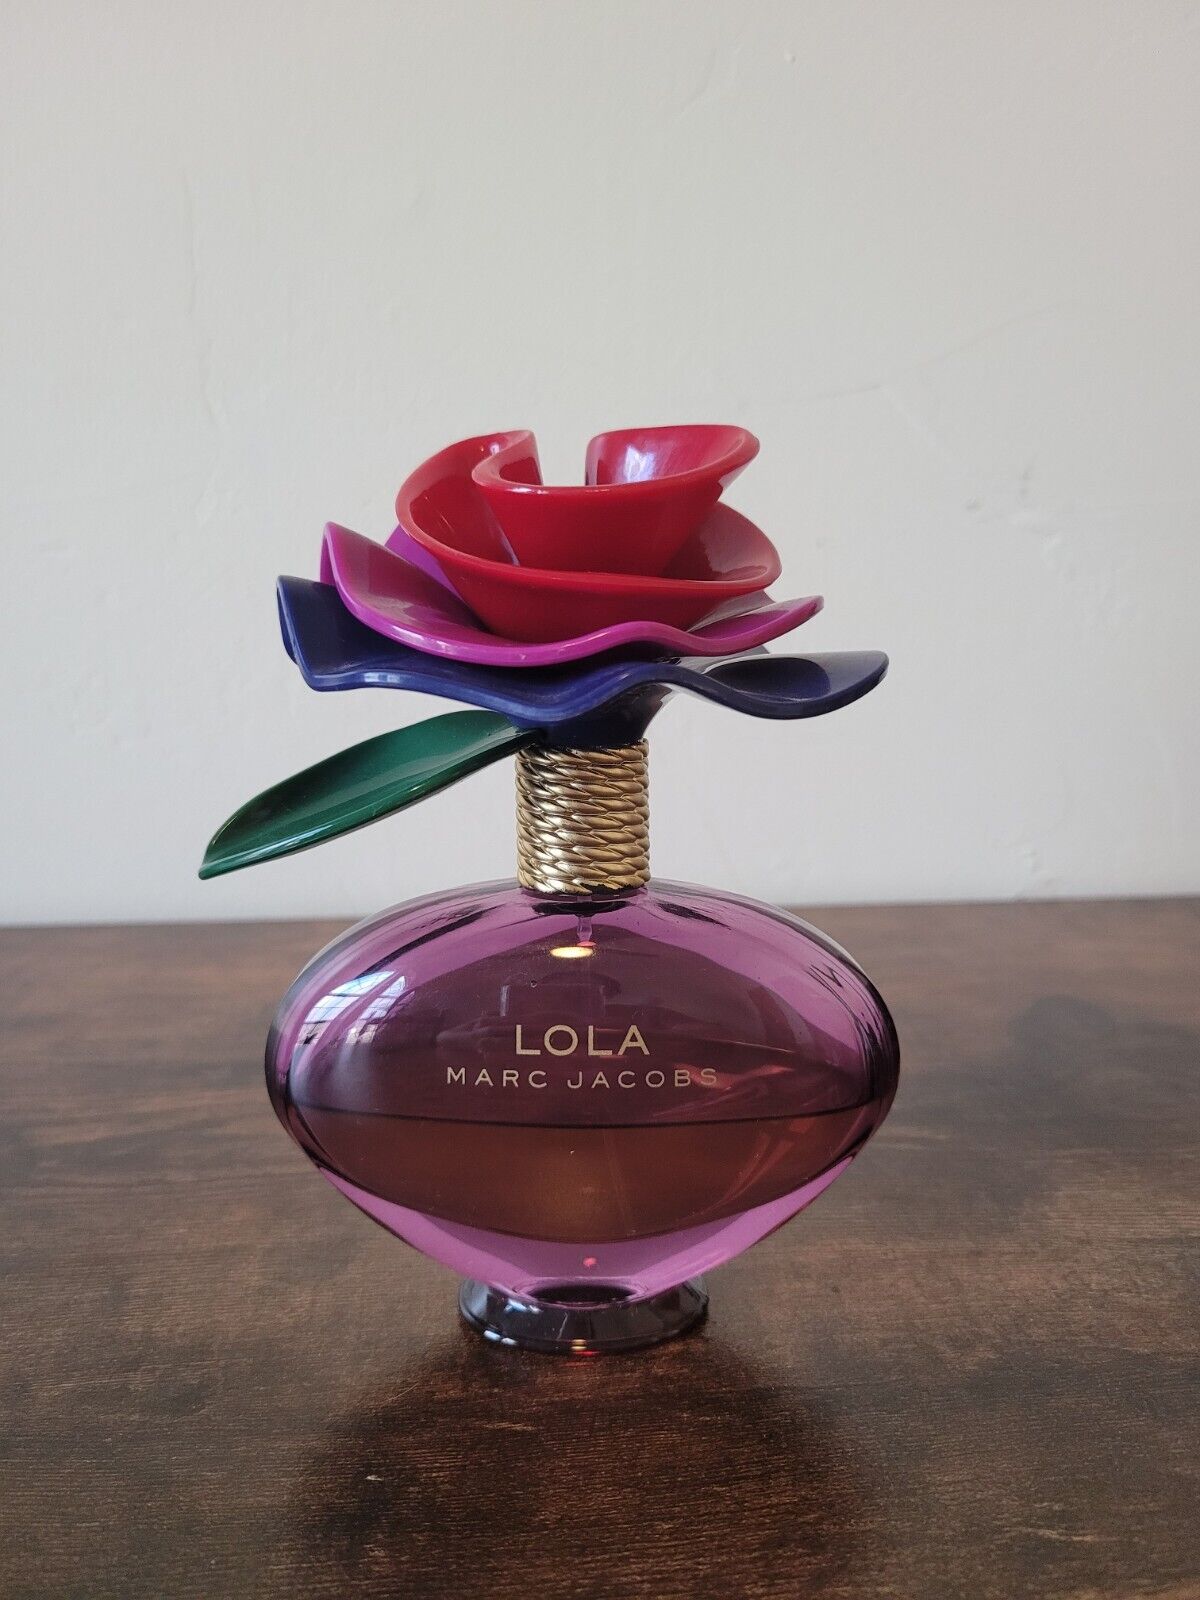 LOLA by MARC JACOBS EDP 100ml Spray, DISCONTINUED, VERY RARE, 45% Full